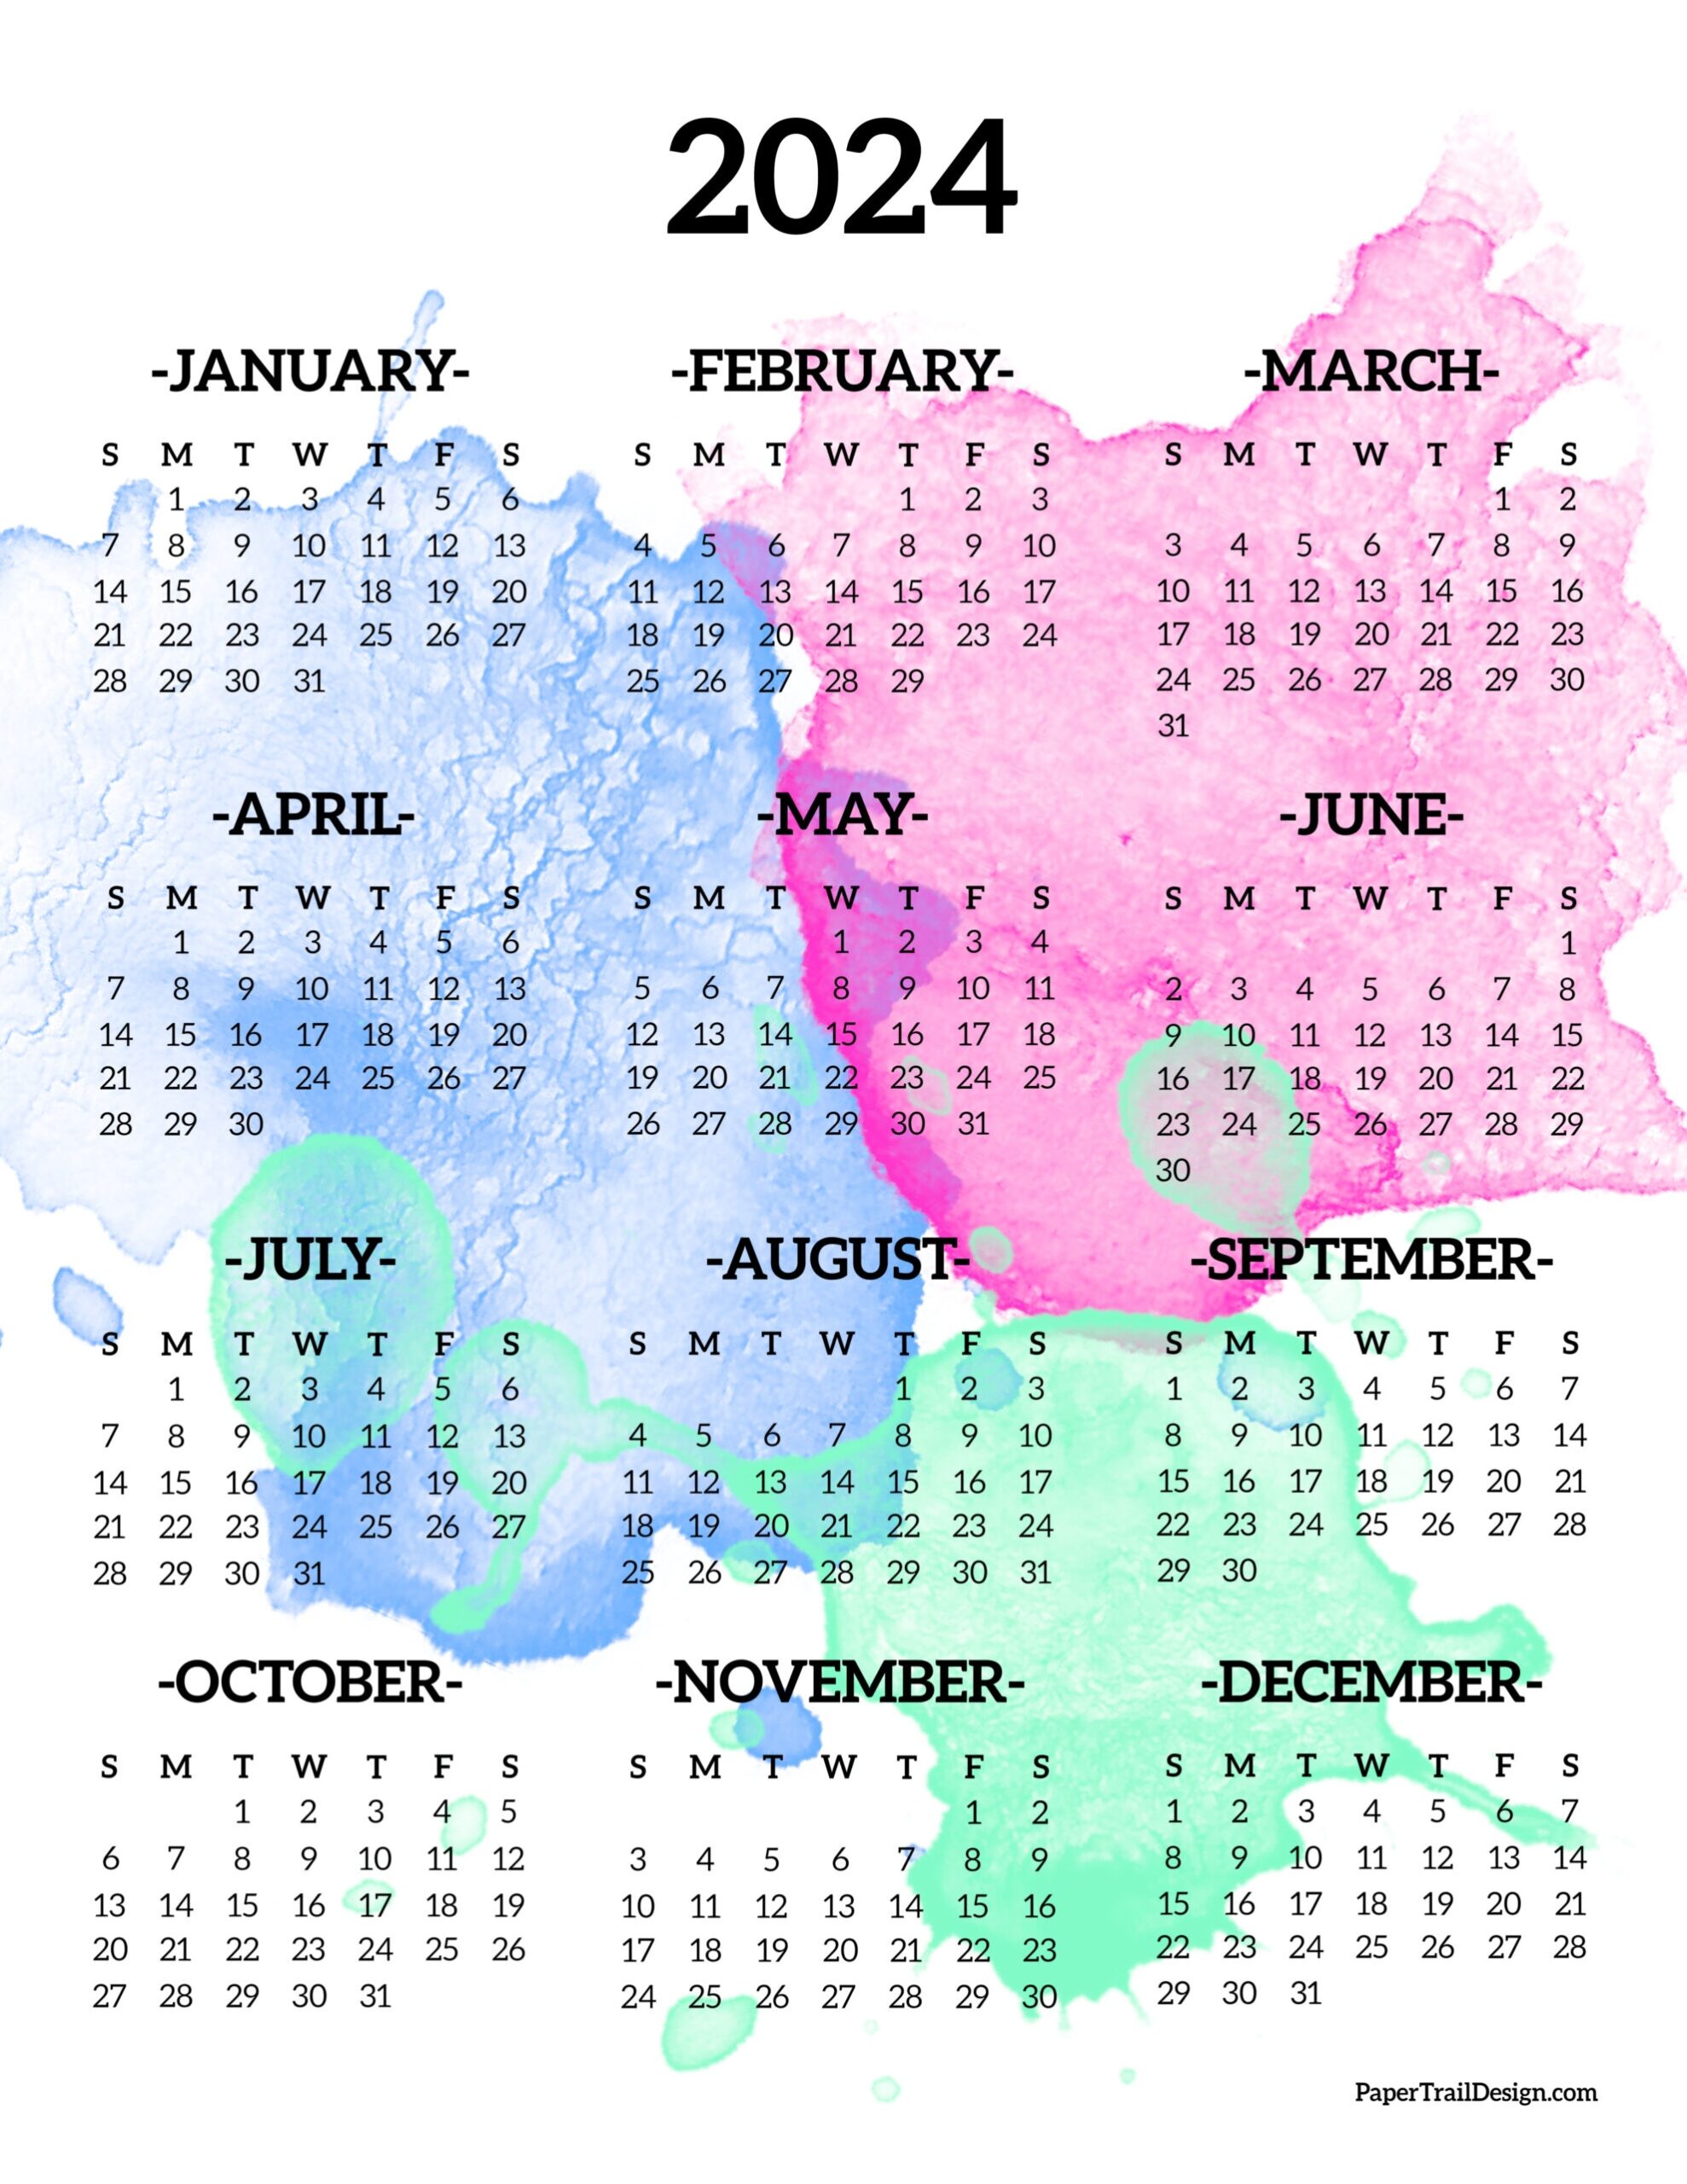 Calendar 2024 Printable One Page - Paper Trail Design for Free Printable Calendar 2024 Paper Trail Design